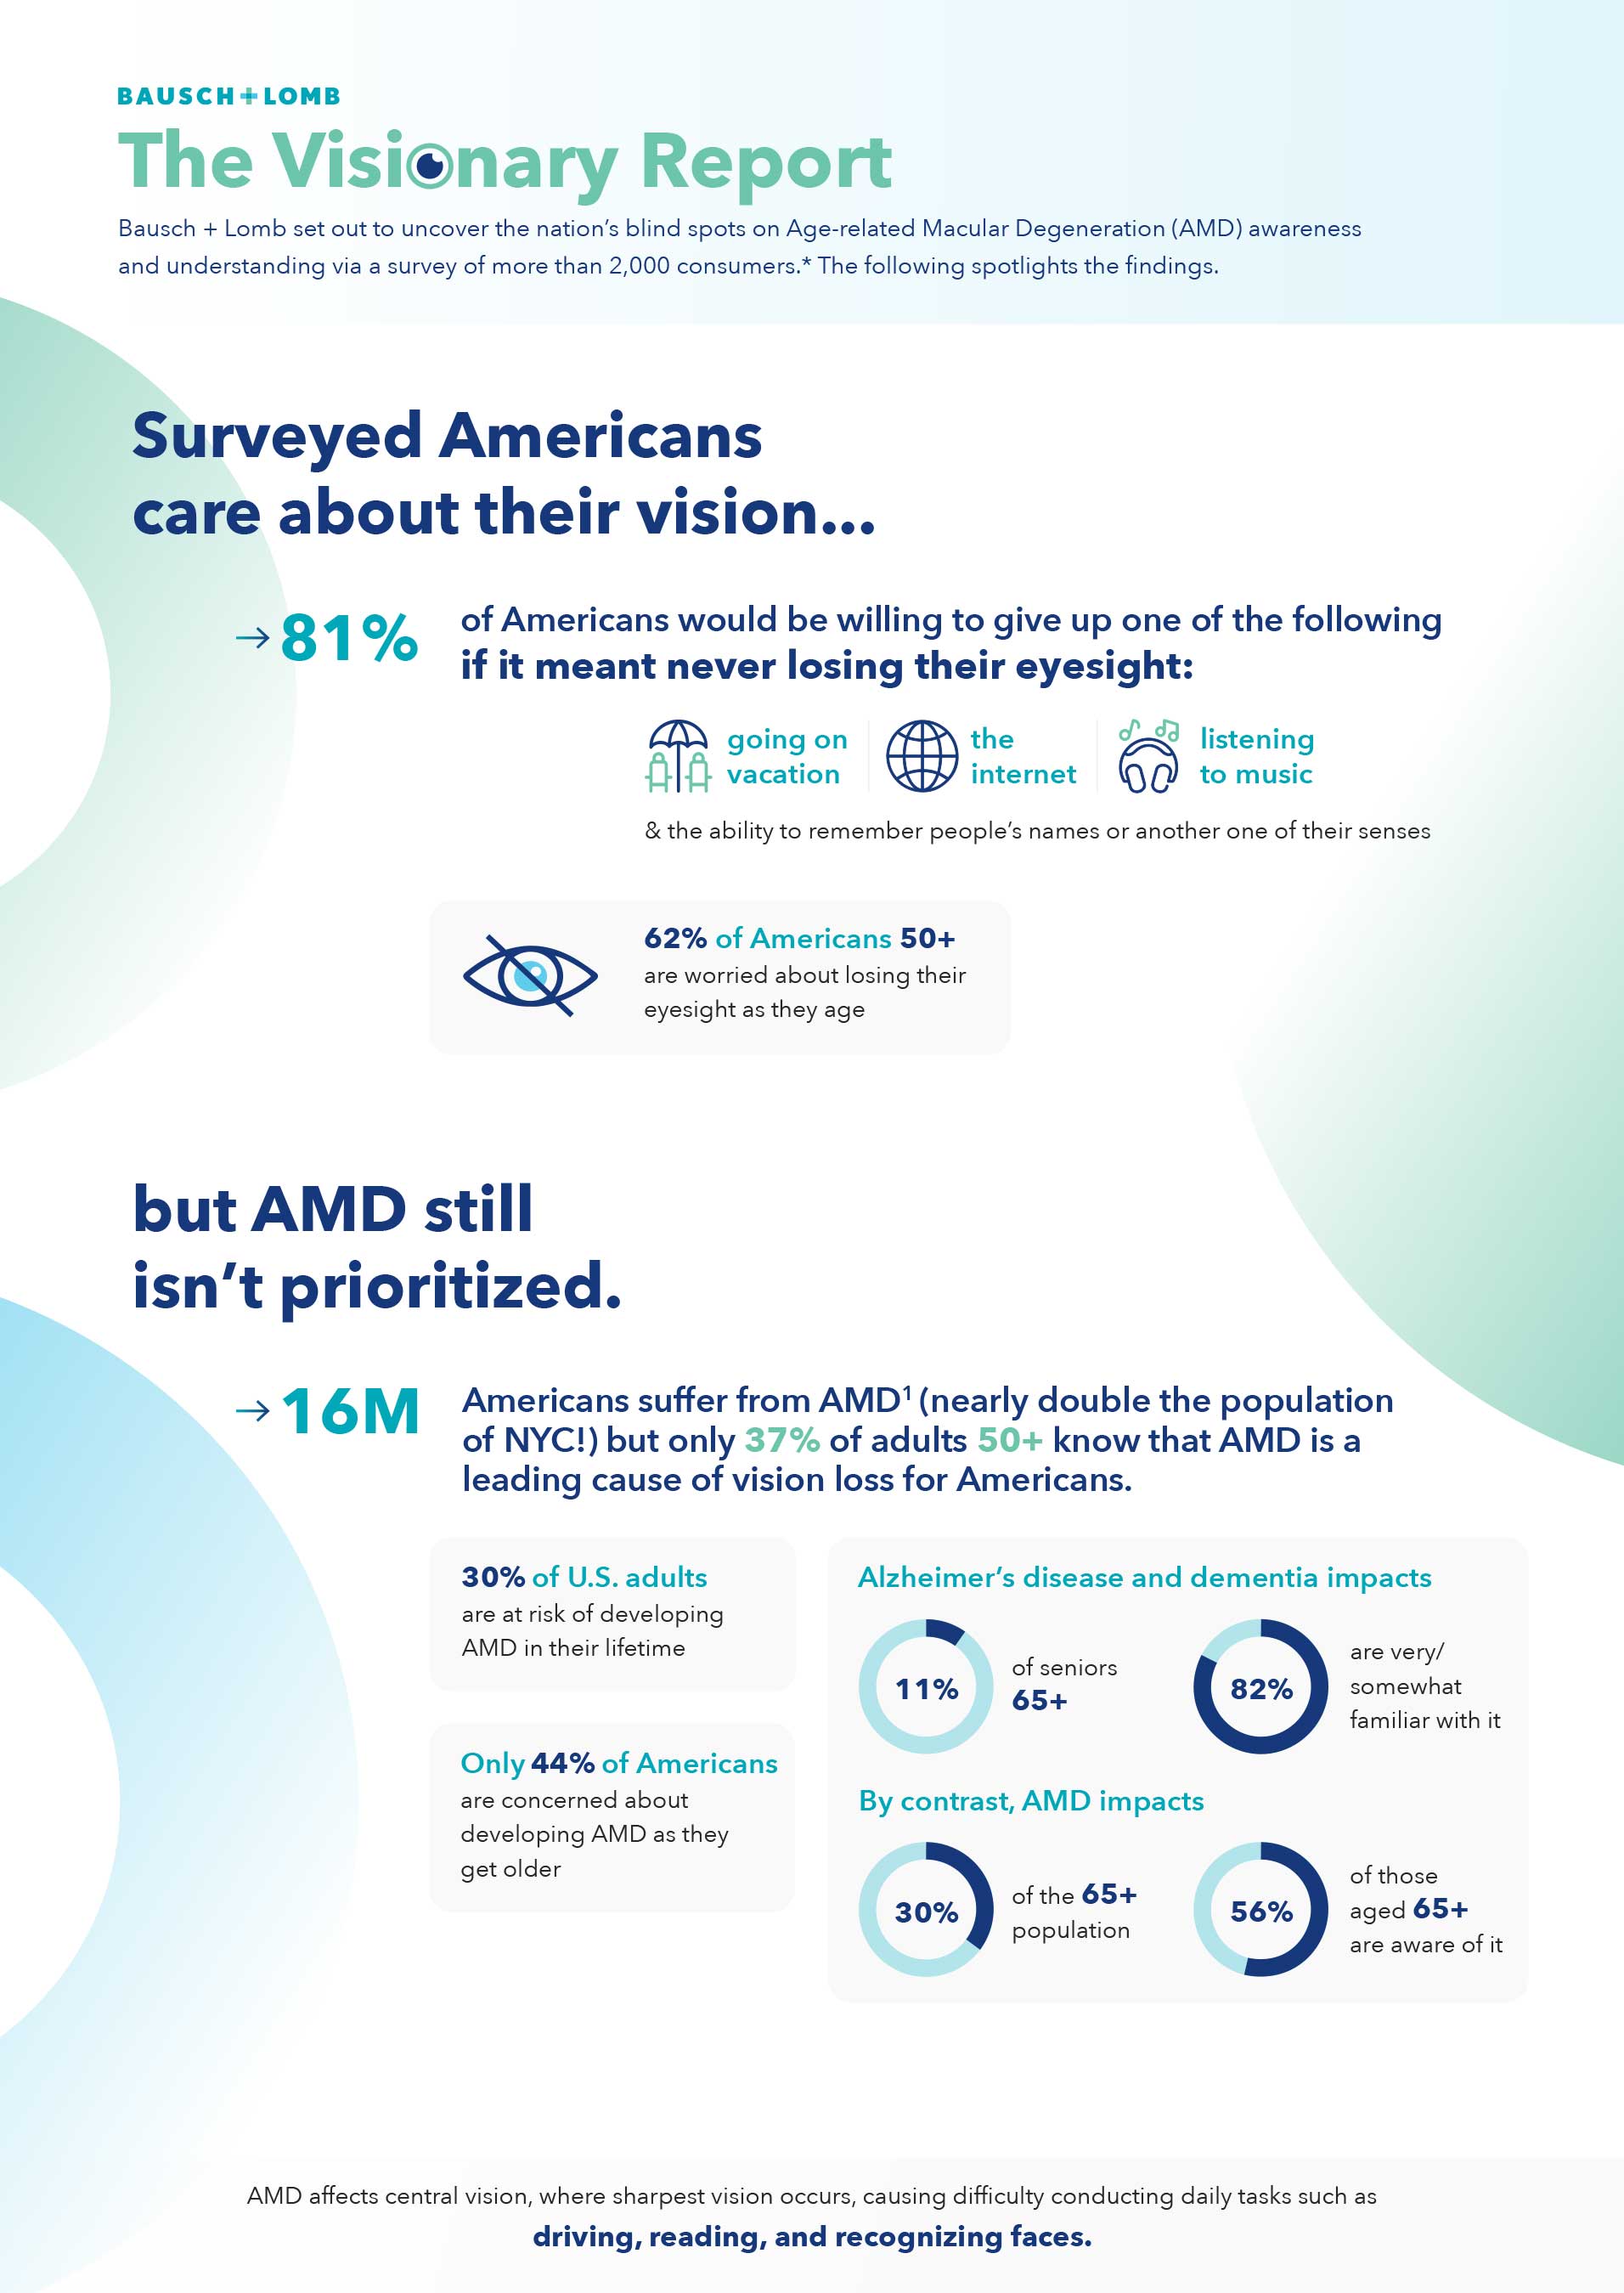 Bausch + Lomb is uncovering the nation’s blind spots on AMD through a survey of more than 2,000 Americans. This Visionary Report highlights the findings.